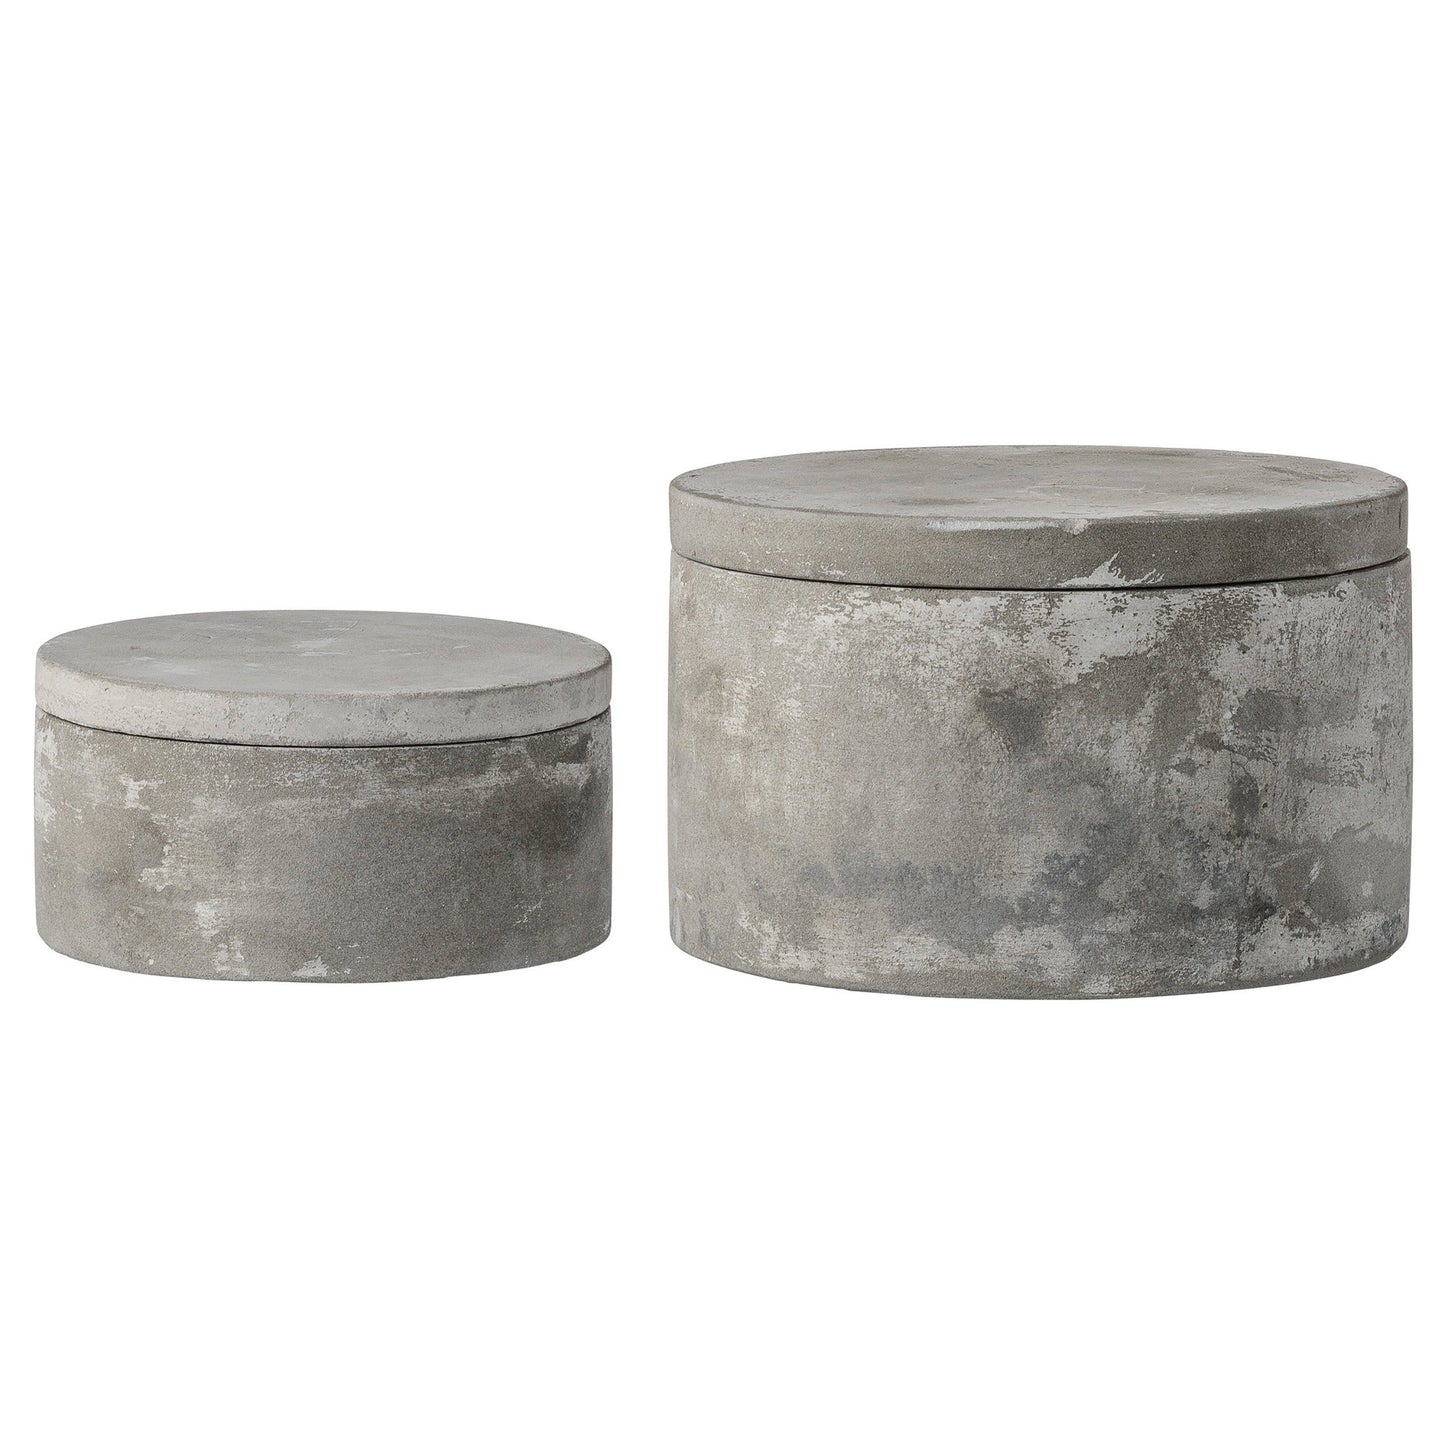 Round Cement Boxes with Lids